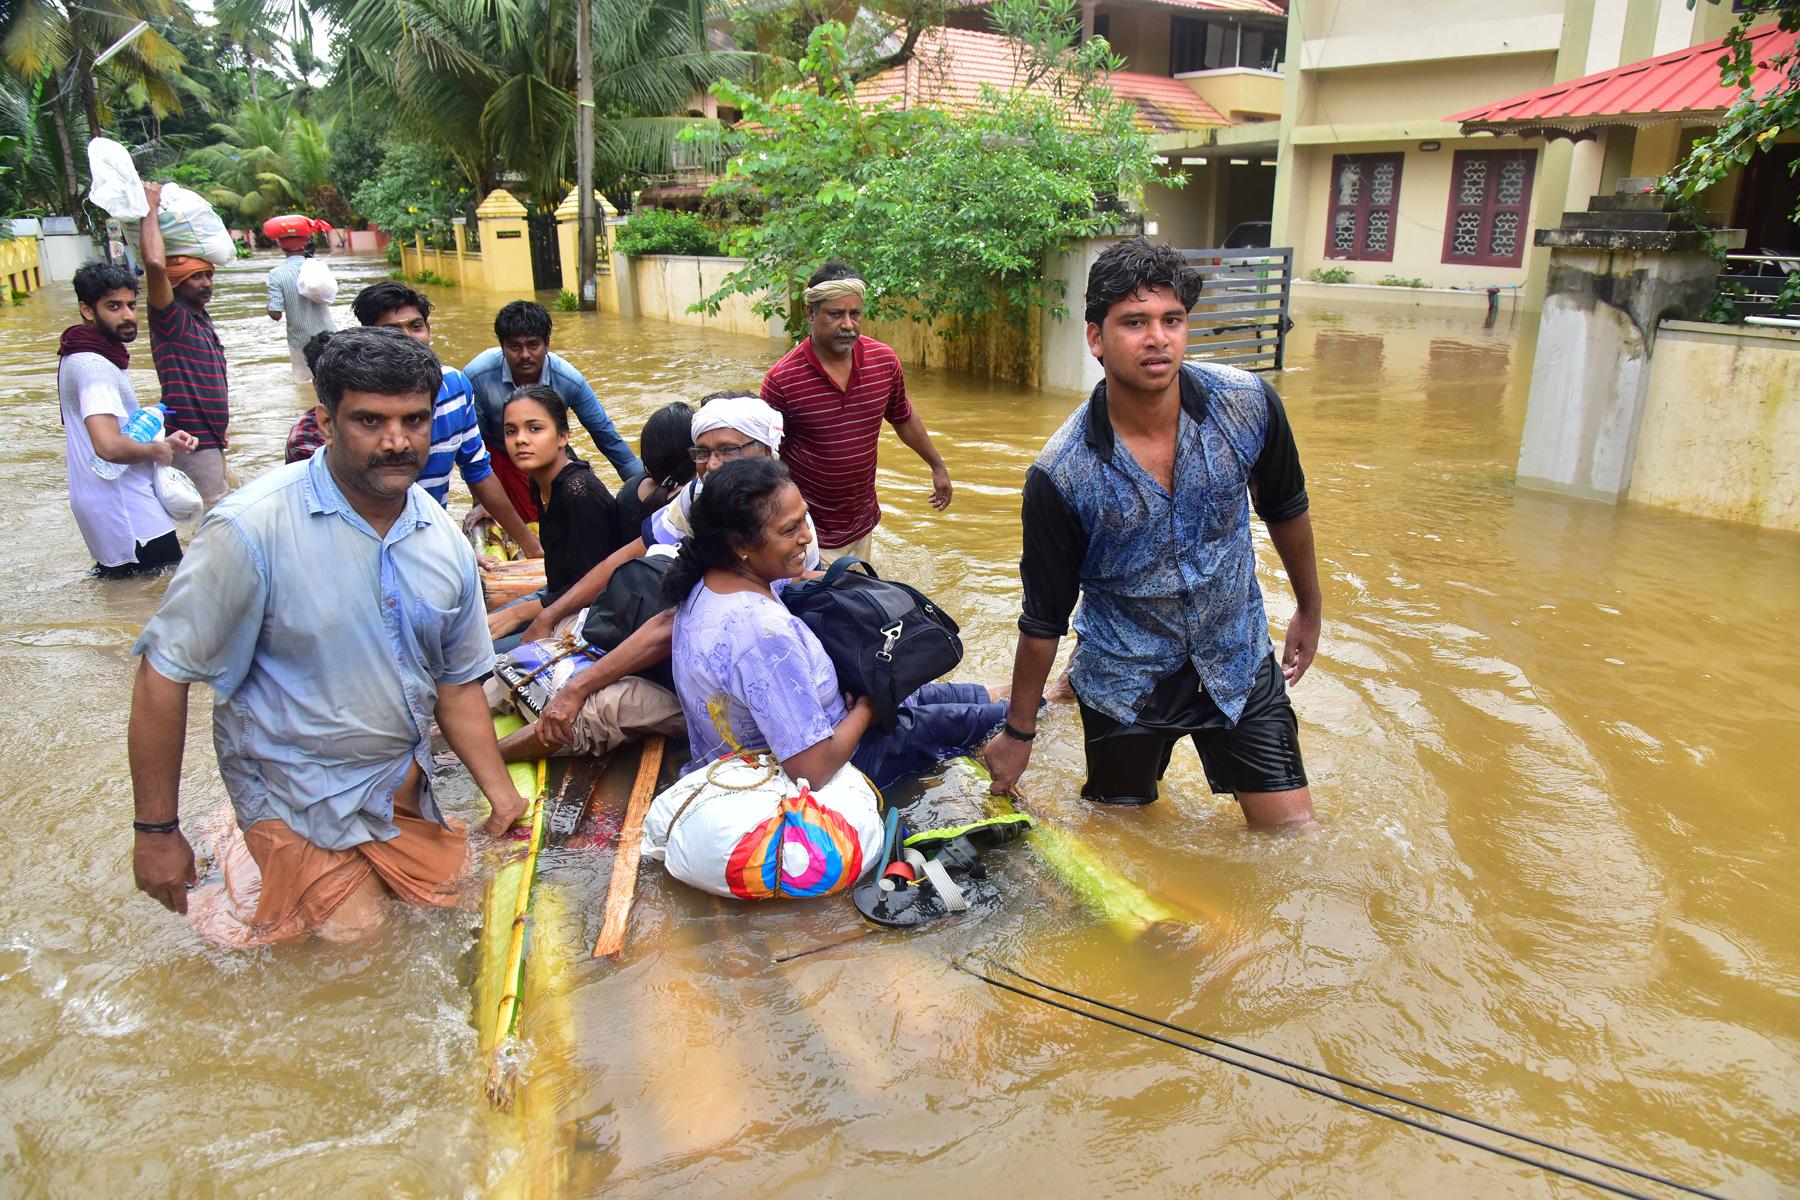 Rescue teams work to save people stranded after severe flooding in Kerala, India. Photo: Shishir Kurian/CSI